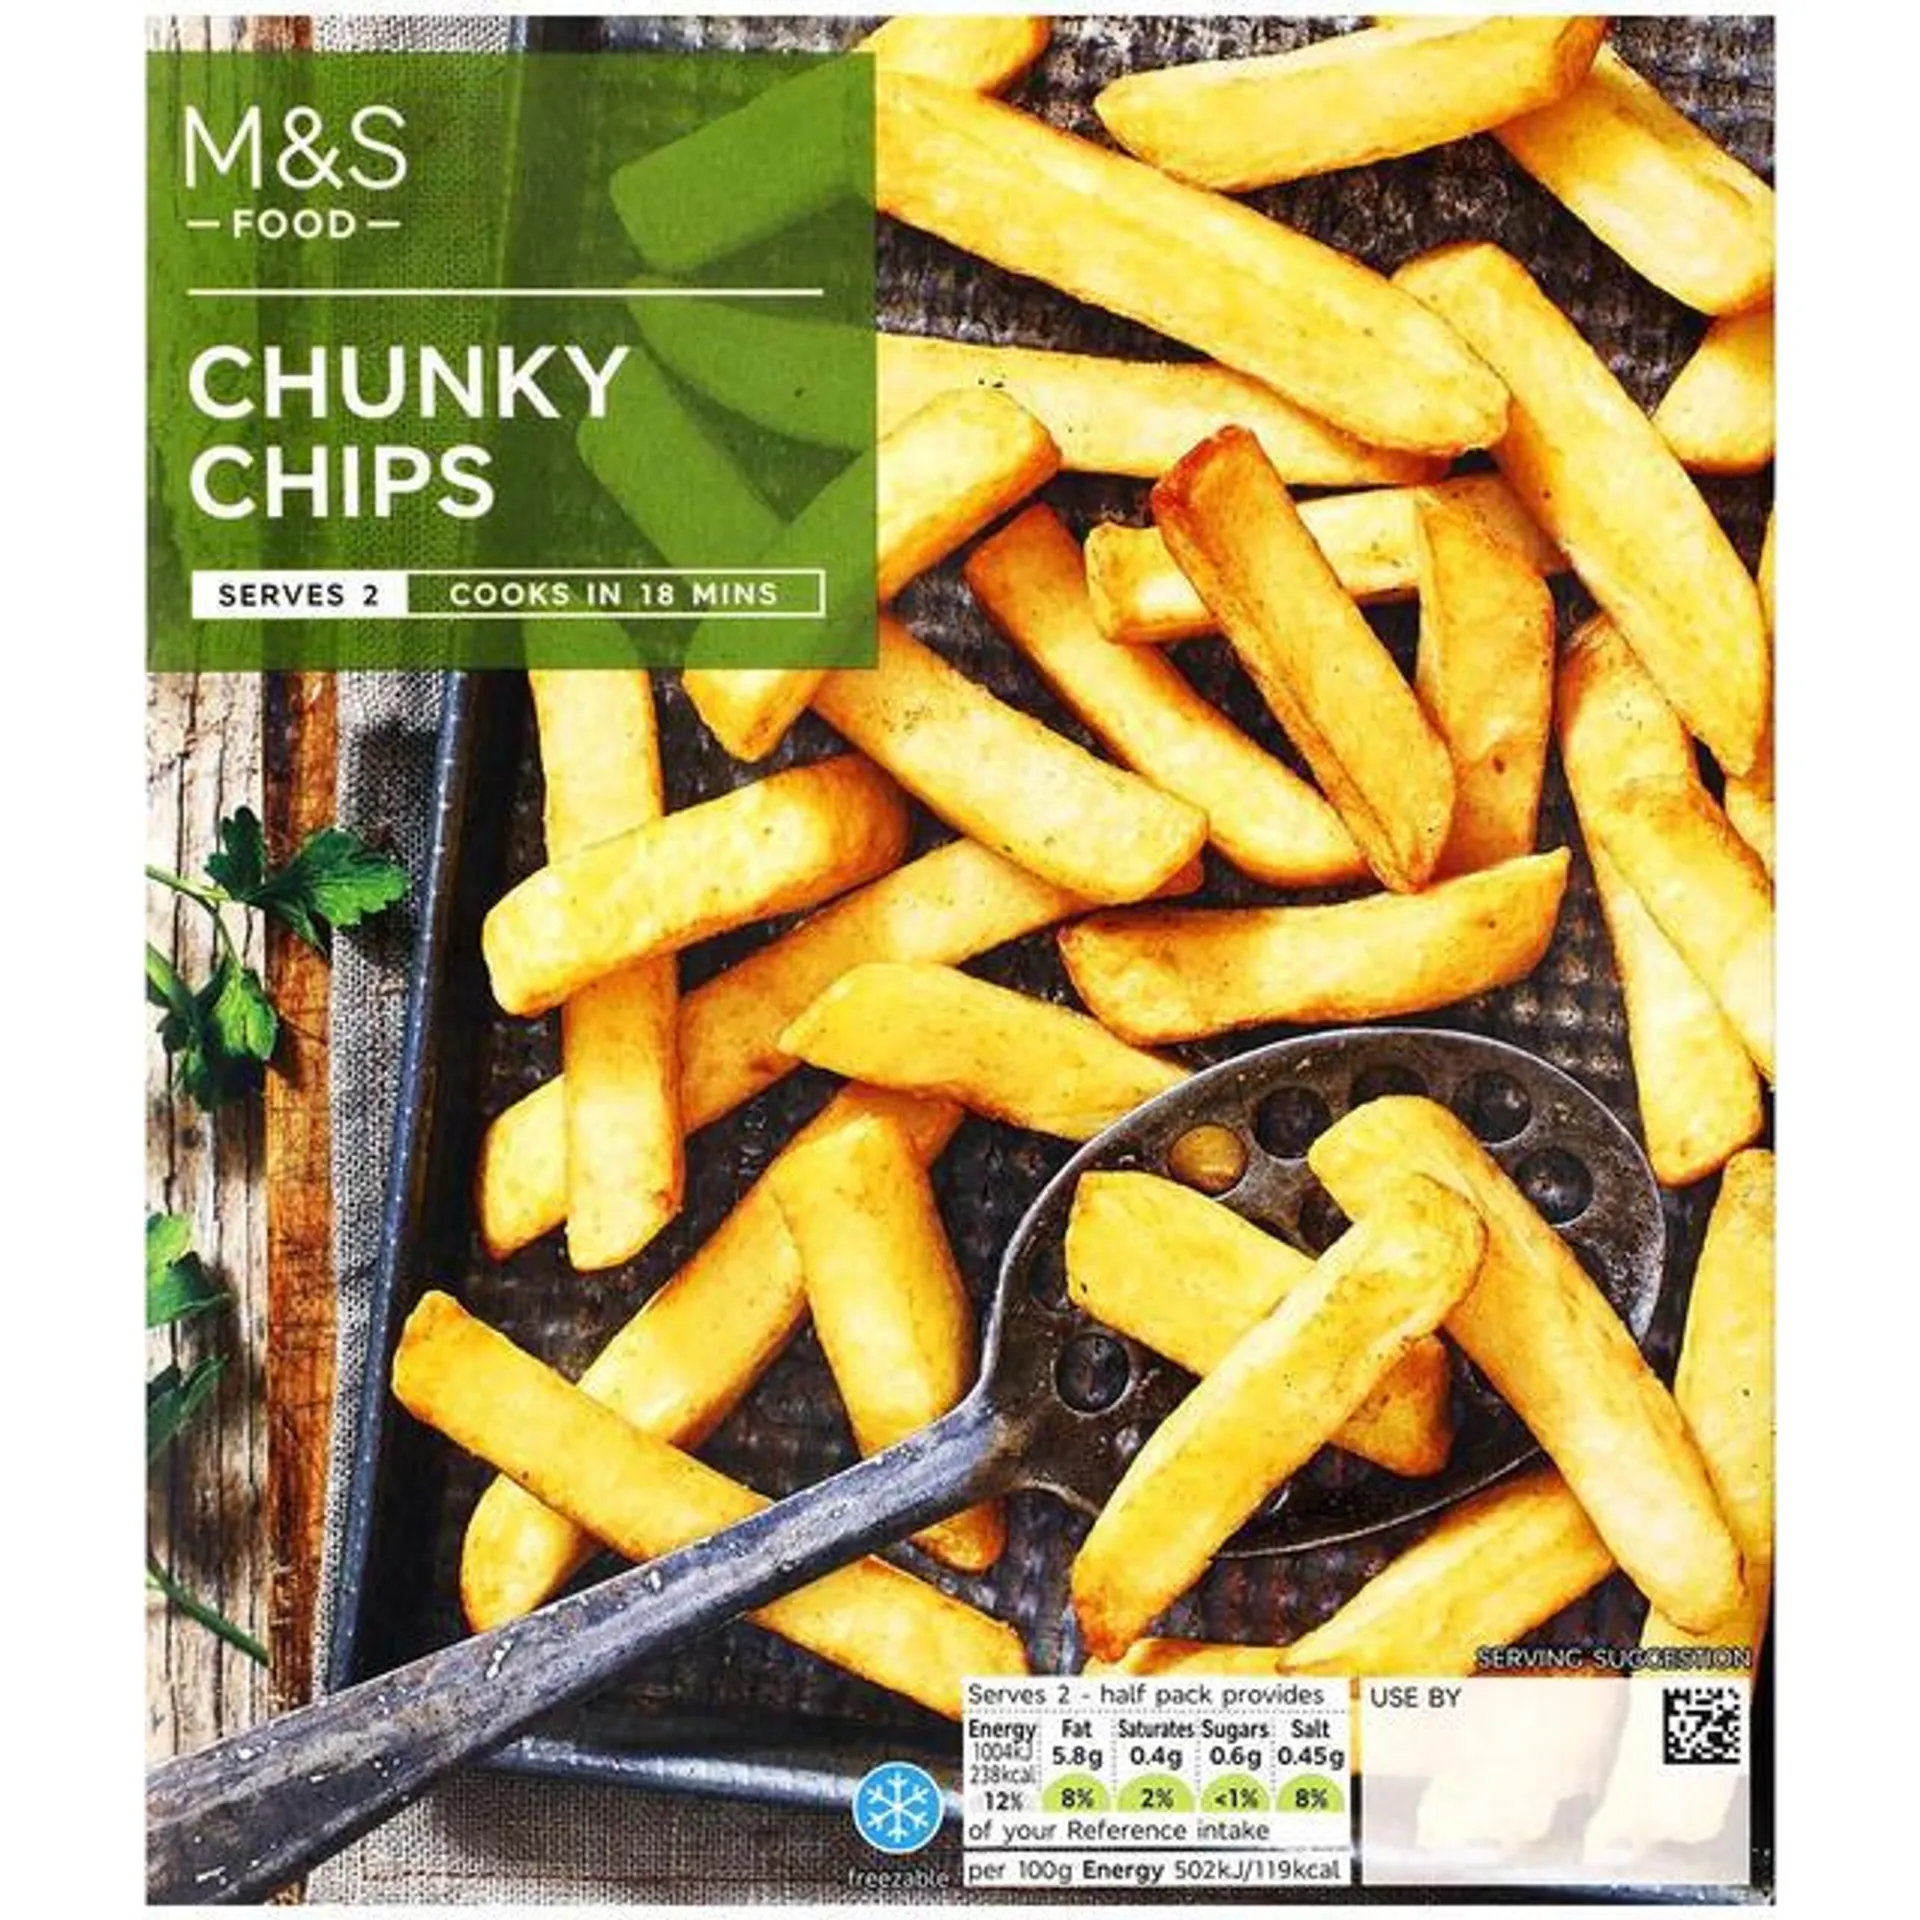 M&S Chunky Chips 400g